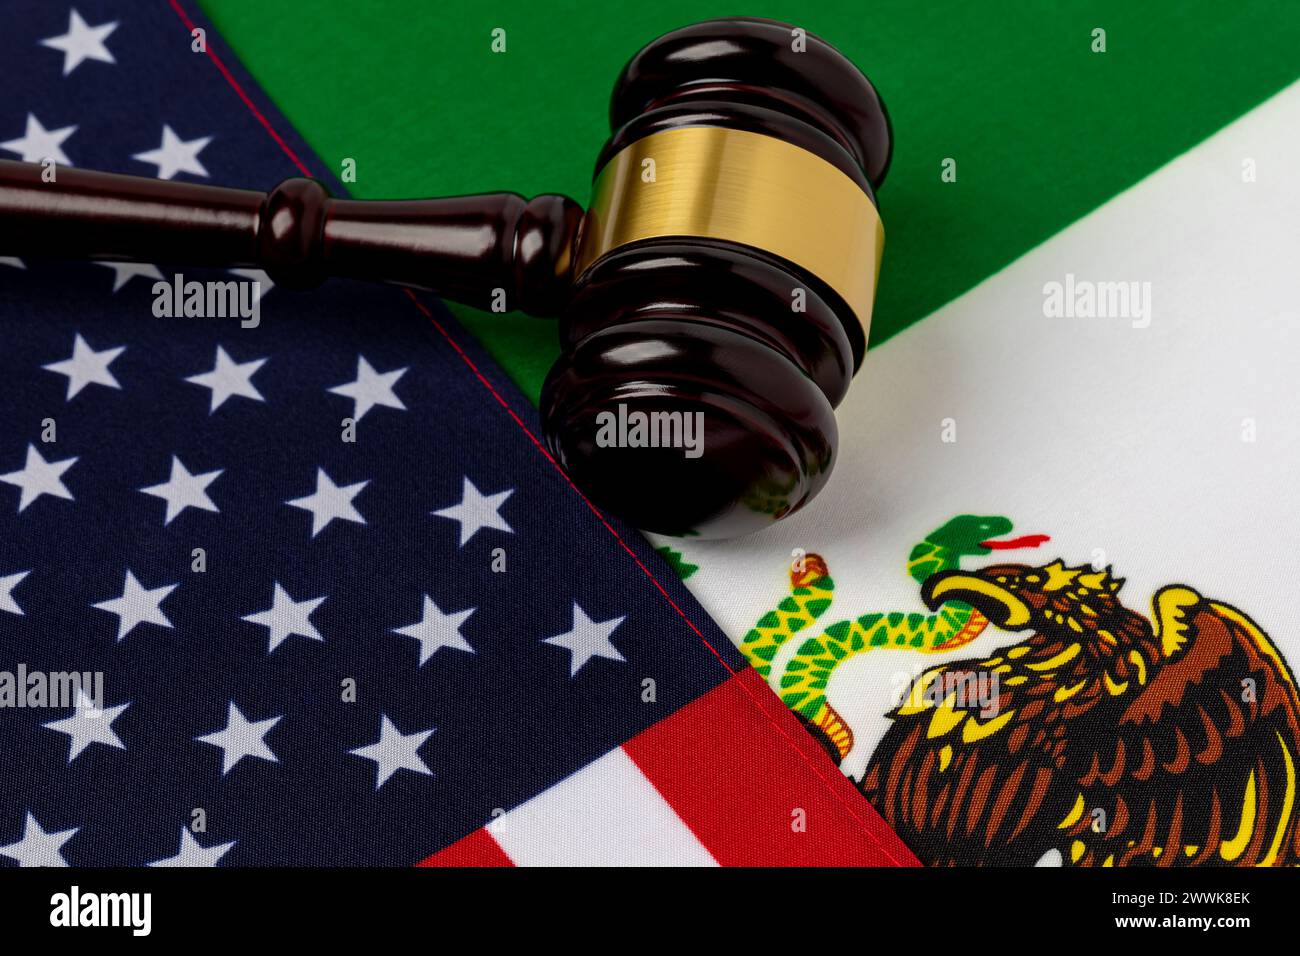 United States and Mexico flags with gavel. Border security, immigration reform and asylum law concept. Stock Photo